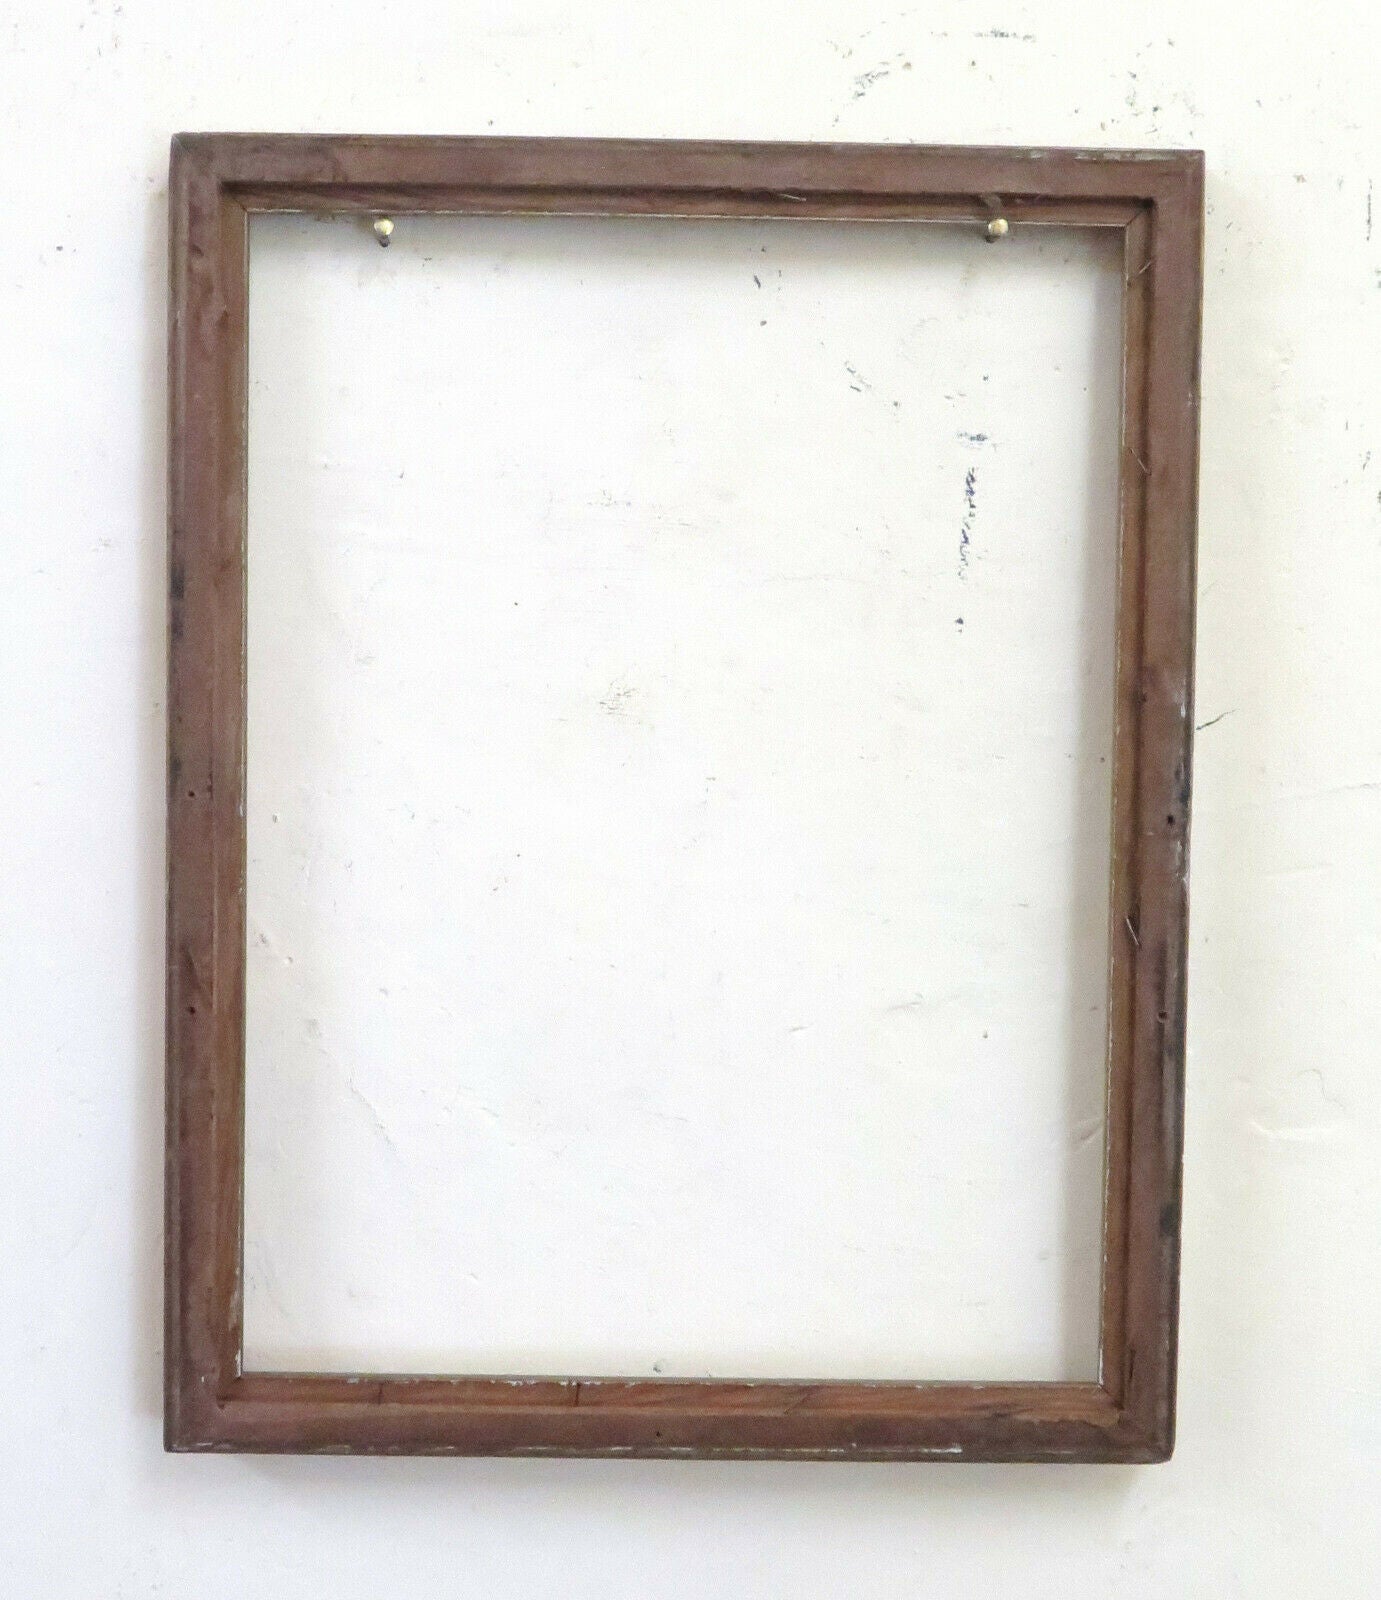 29x37 cm FRAME FOR VINTAGE PAINTINGS IN GOLDEN WOOD SIMPLE LINEAR BM43 